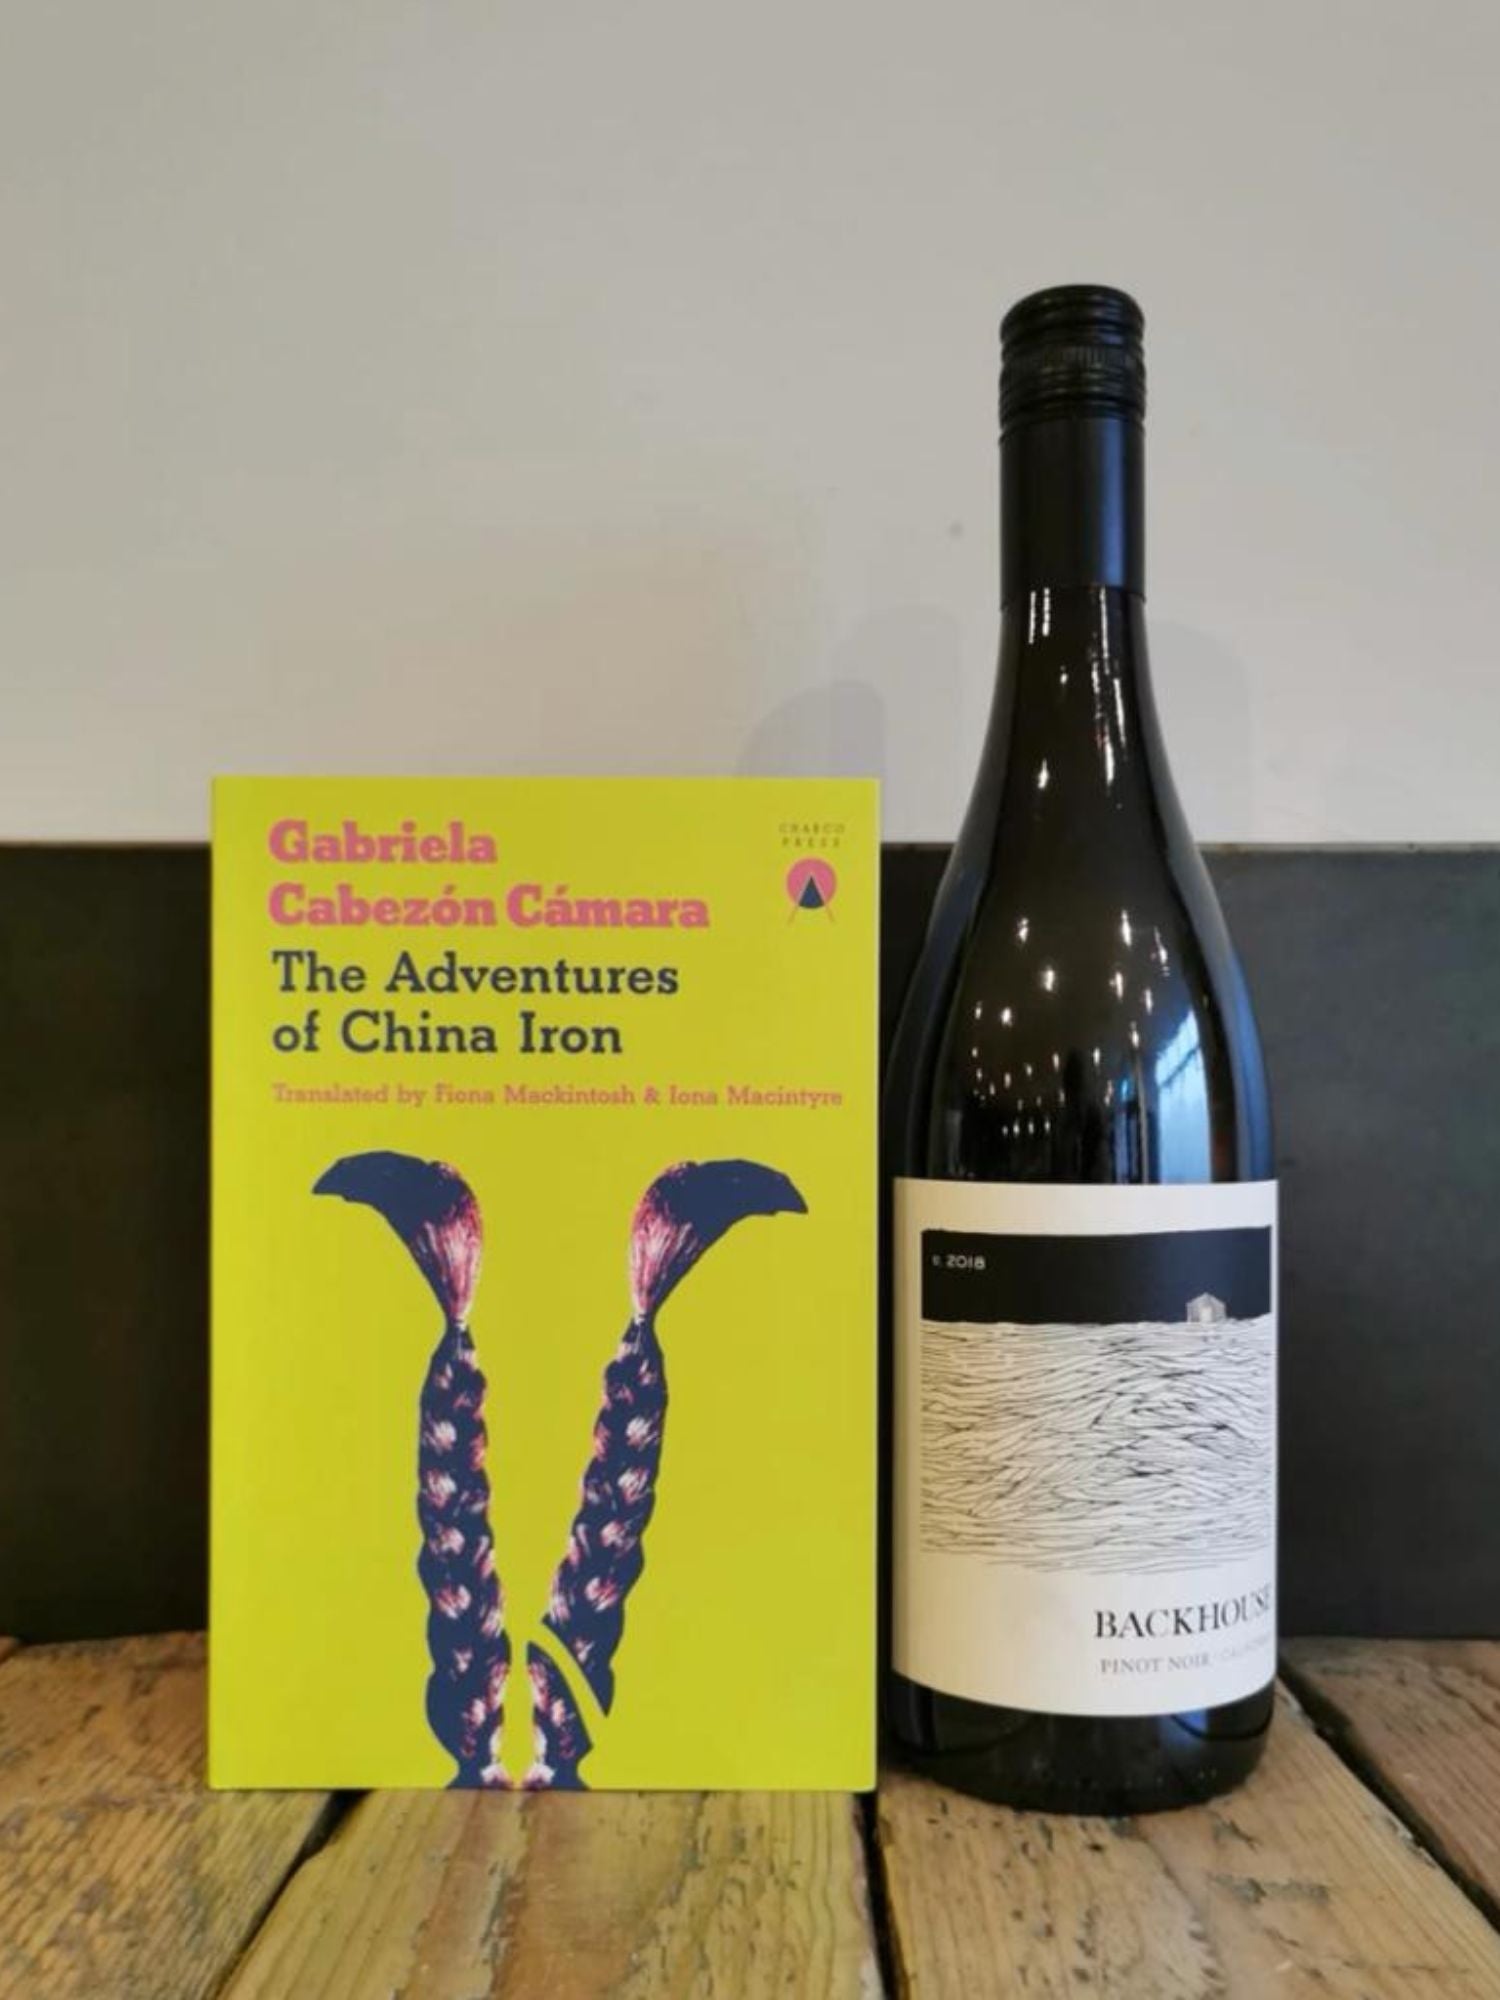 S&G x Charco Press: Book & Wine Combo